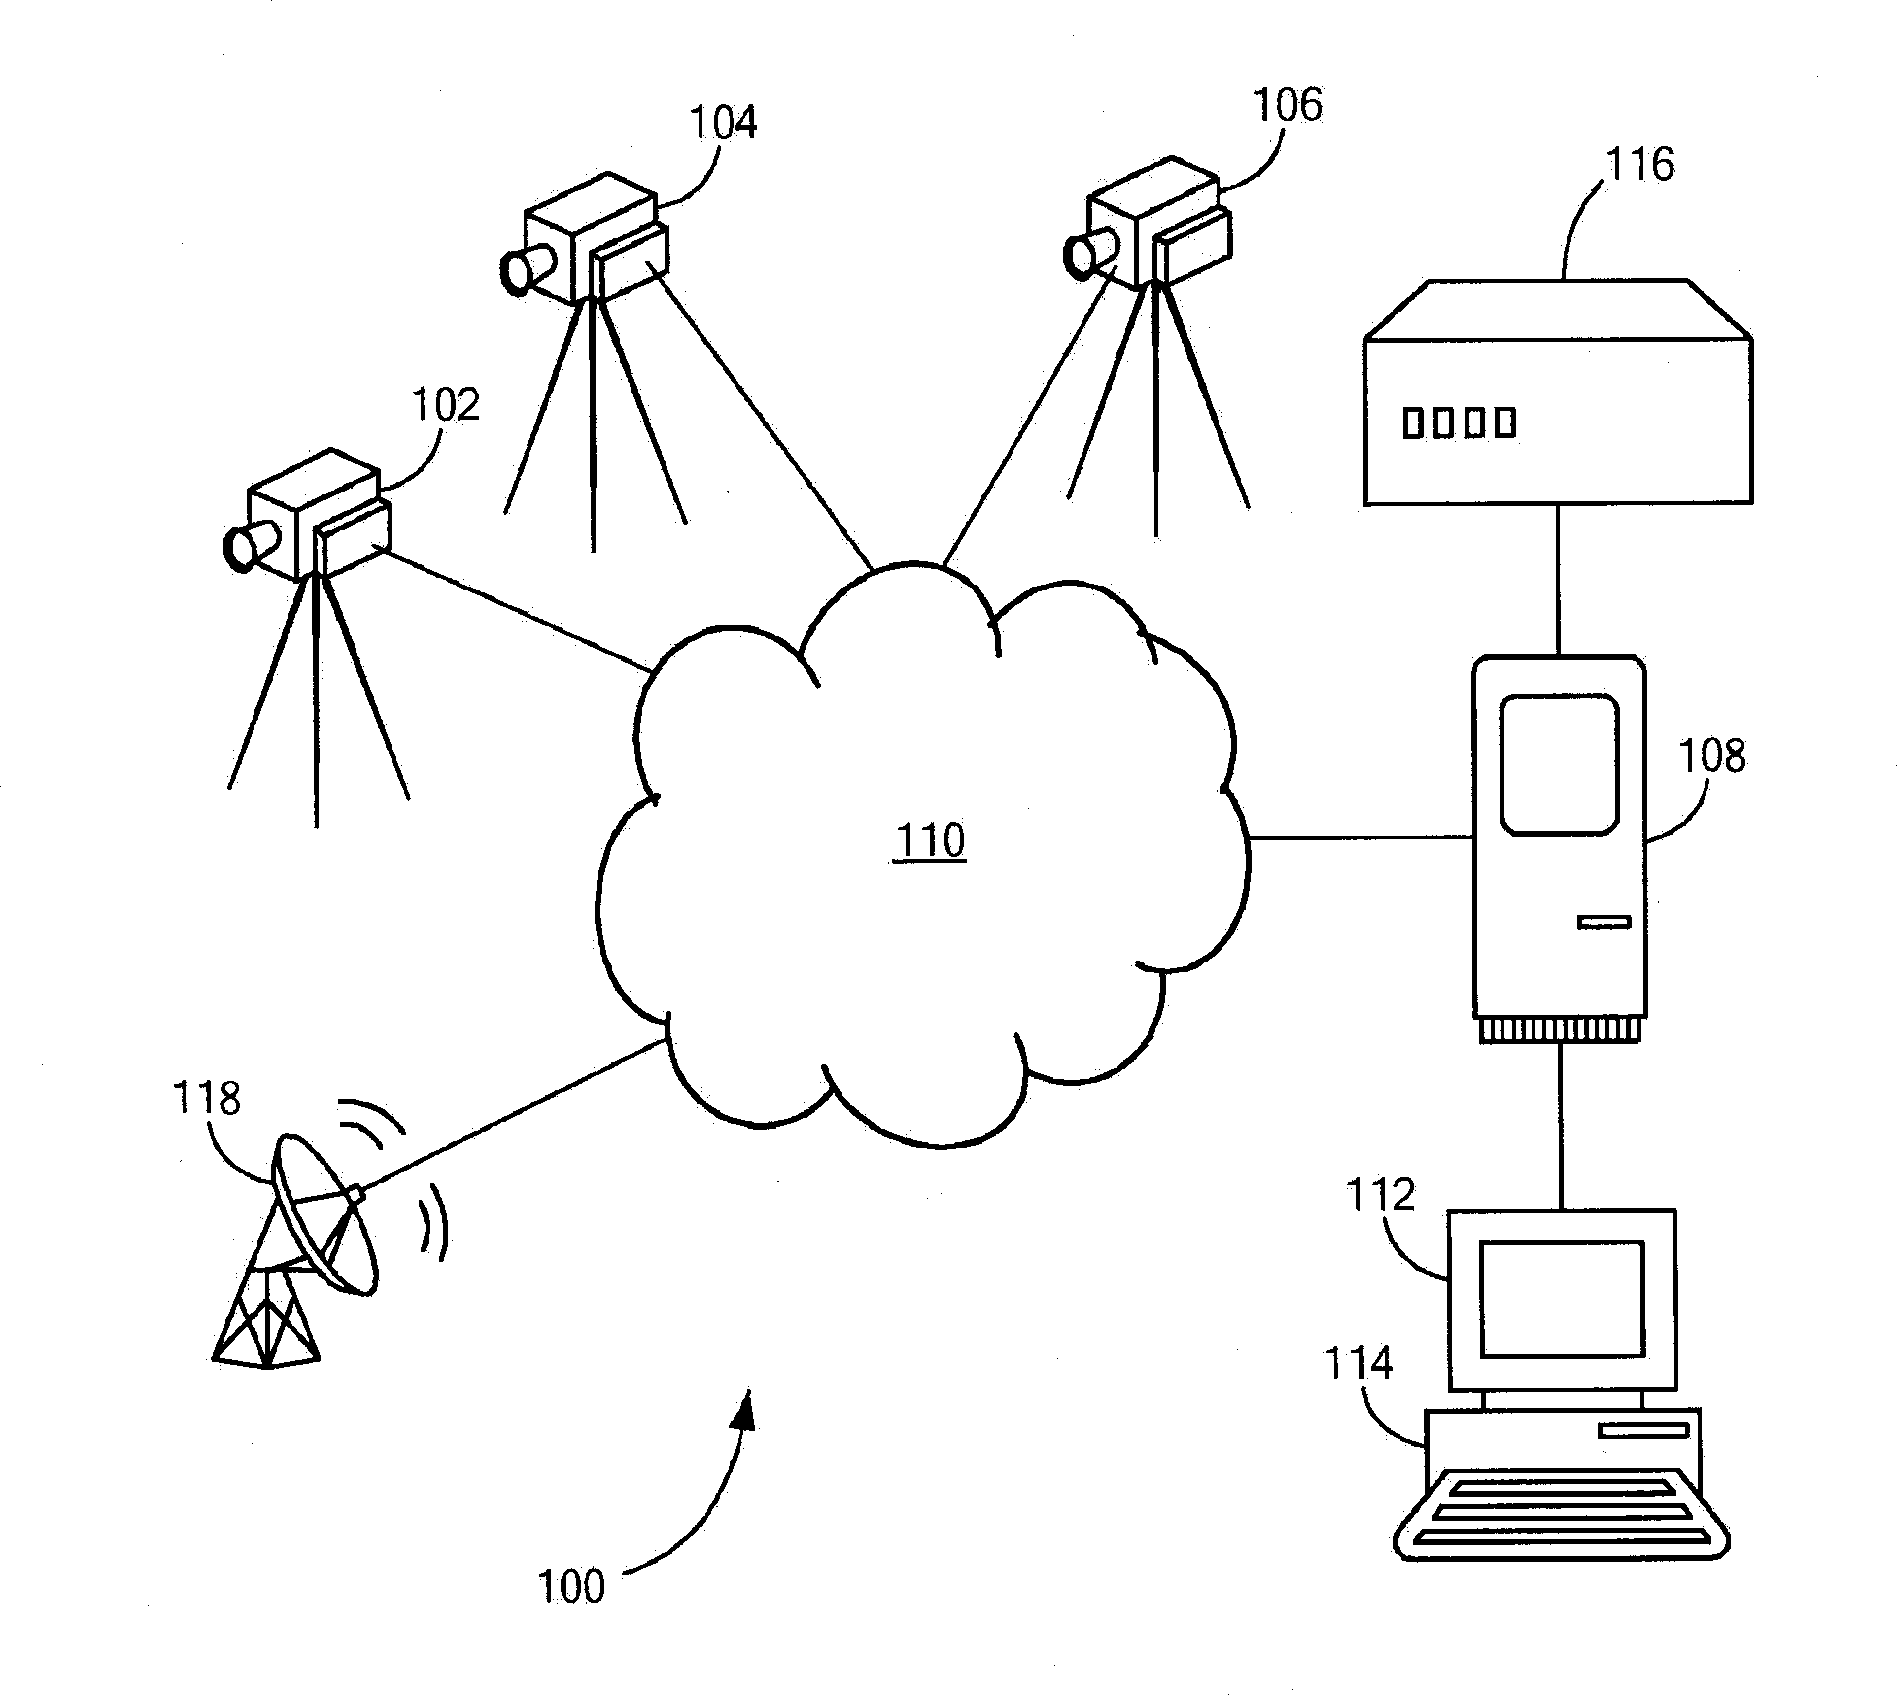 System and method for camera control in a surveillance system